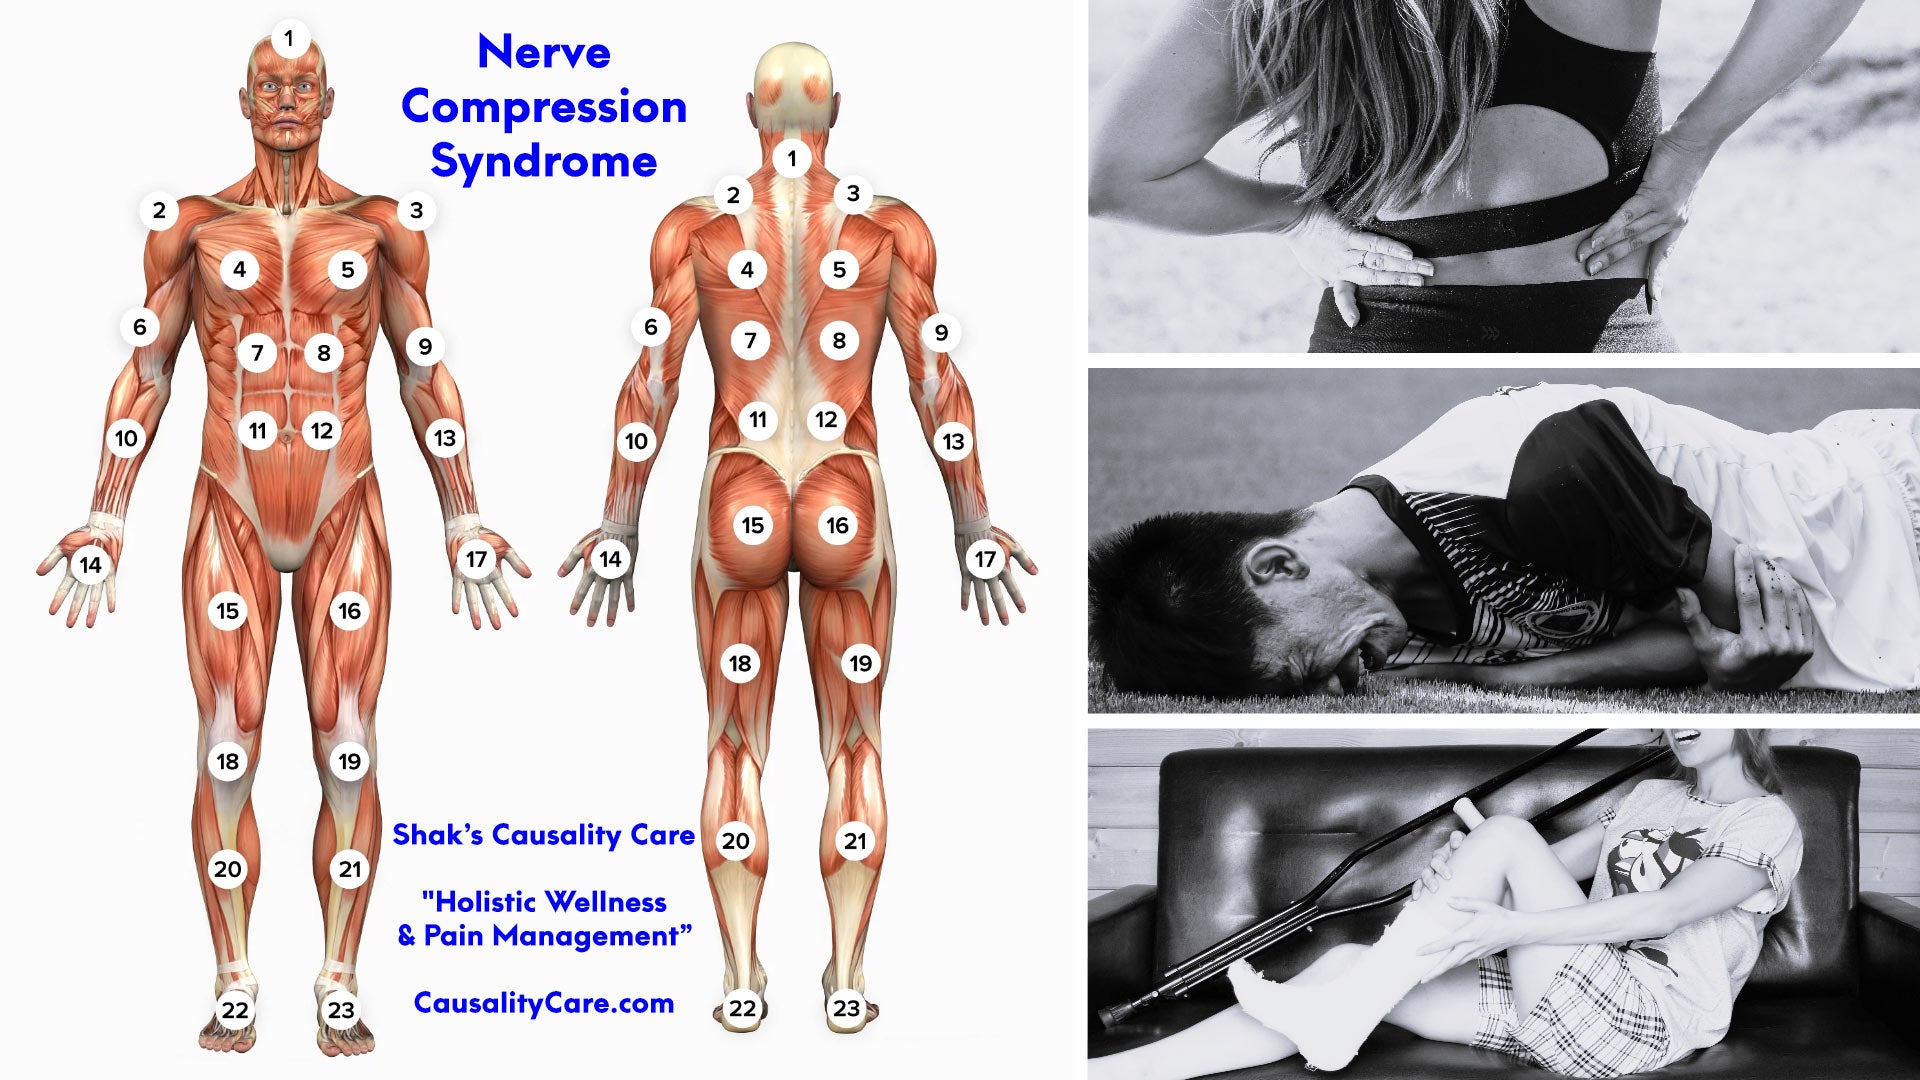 Shak's Causality Care | What is Nerve Compression Syndromes? | CausalityCare.com